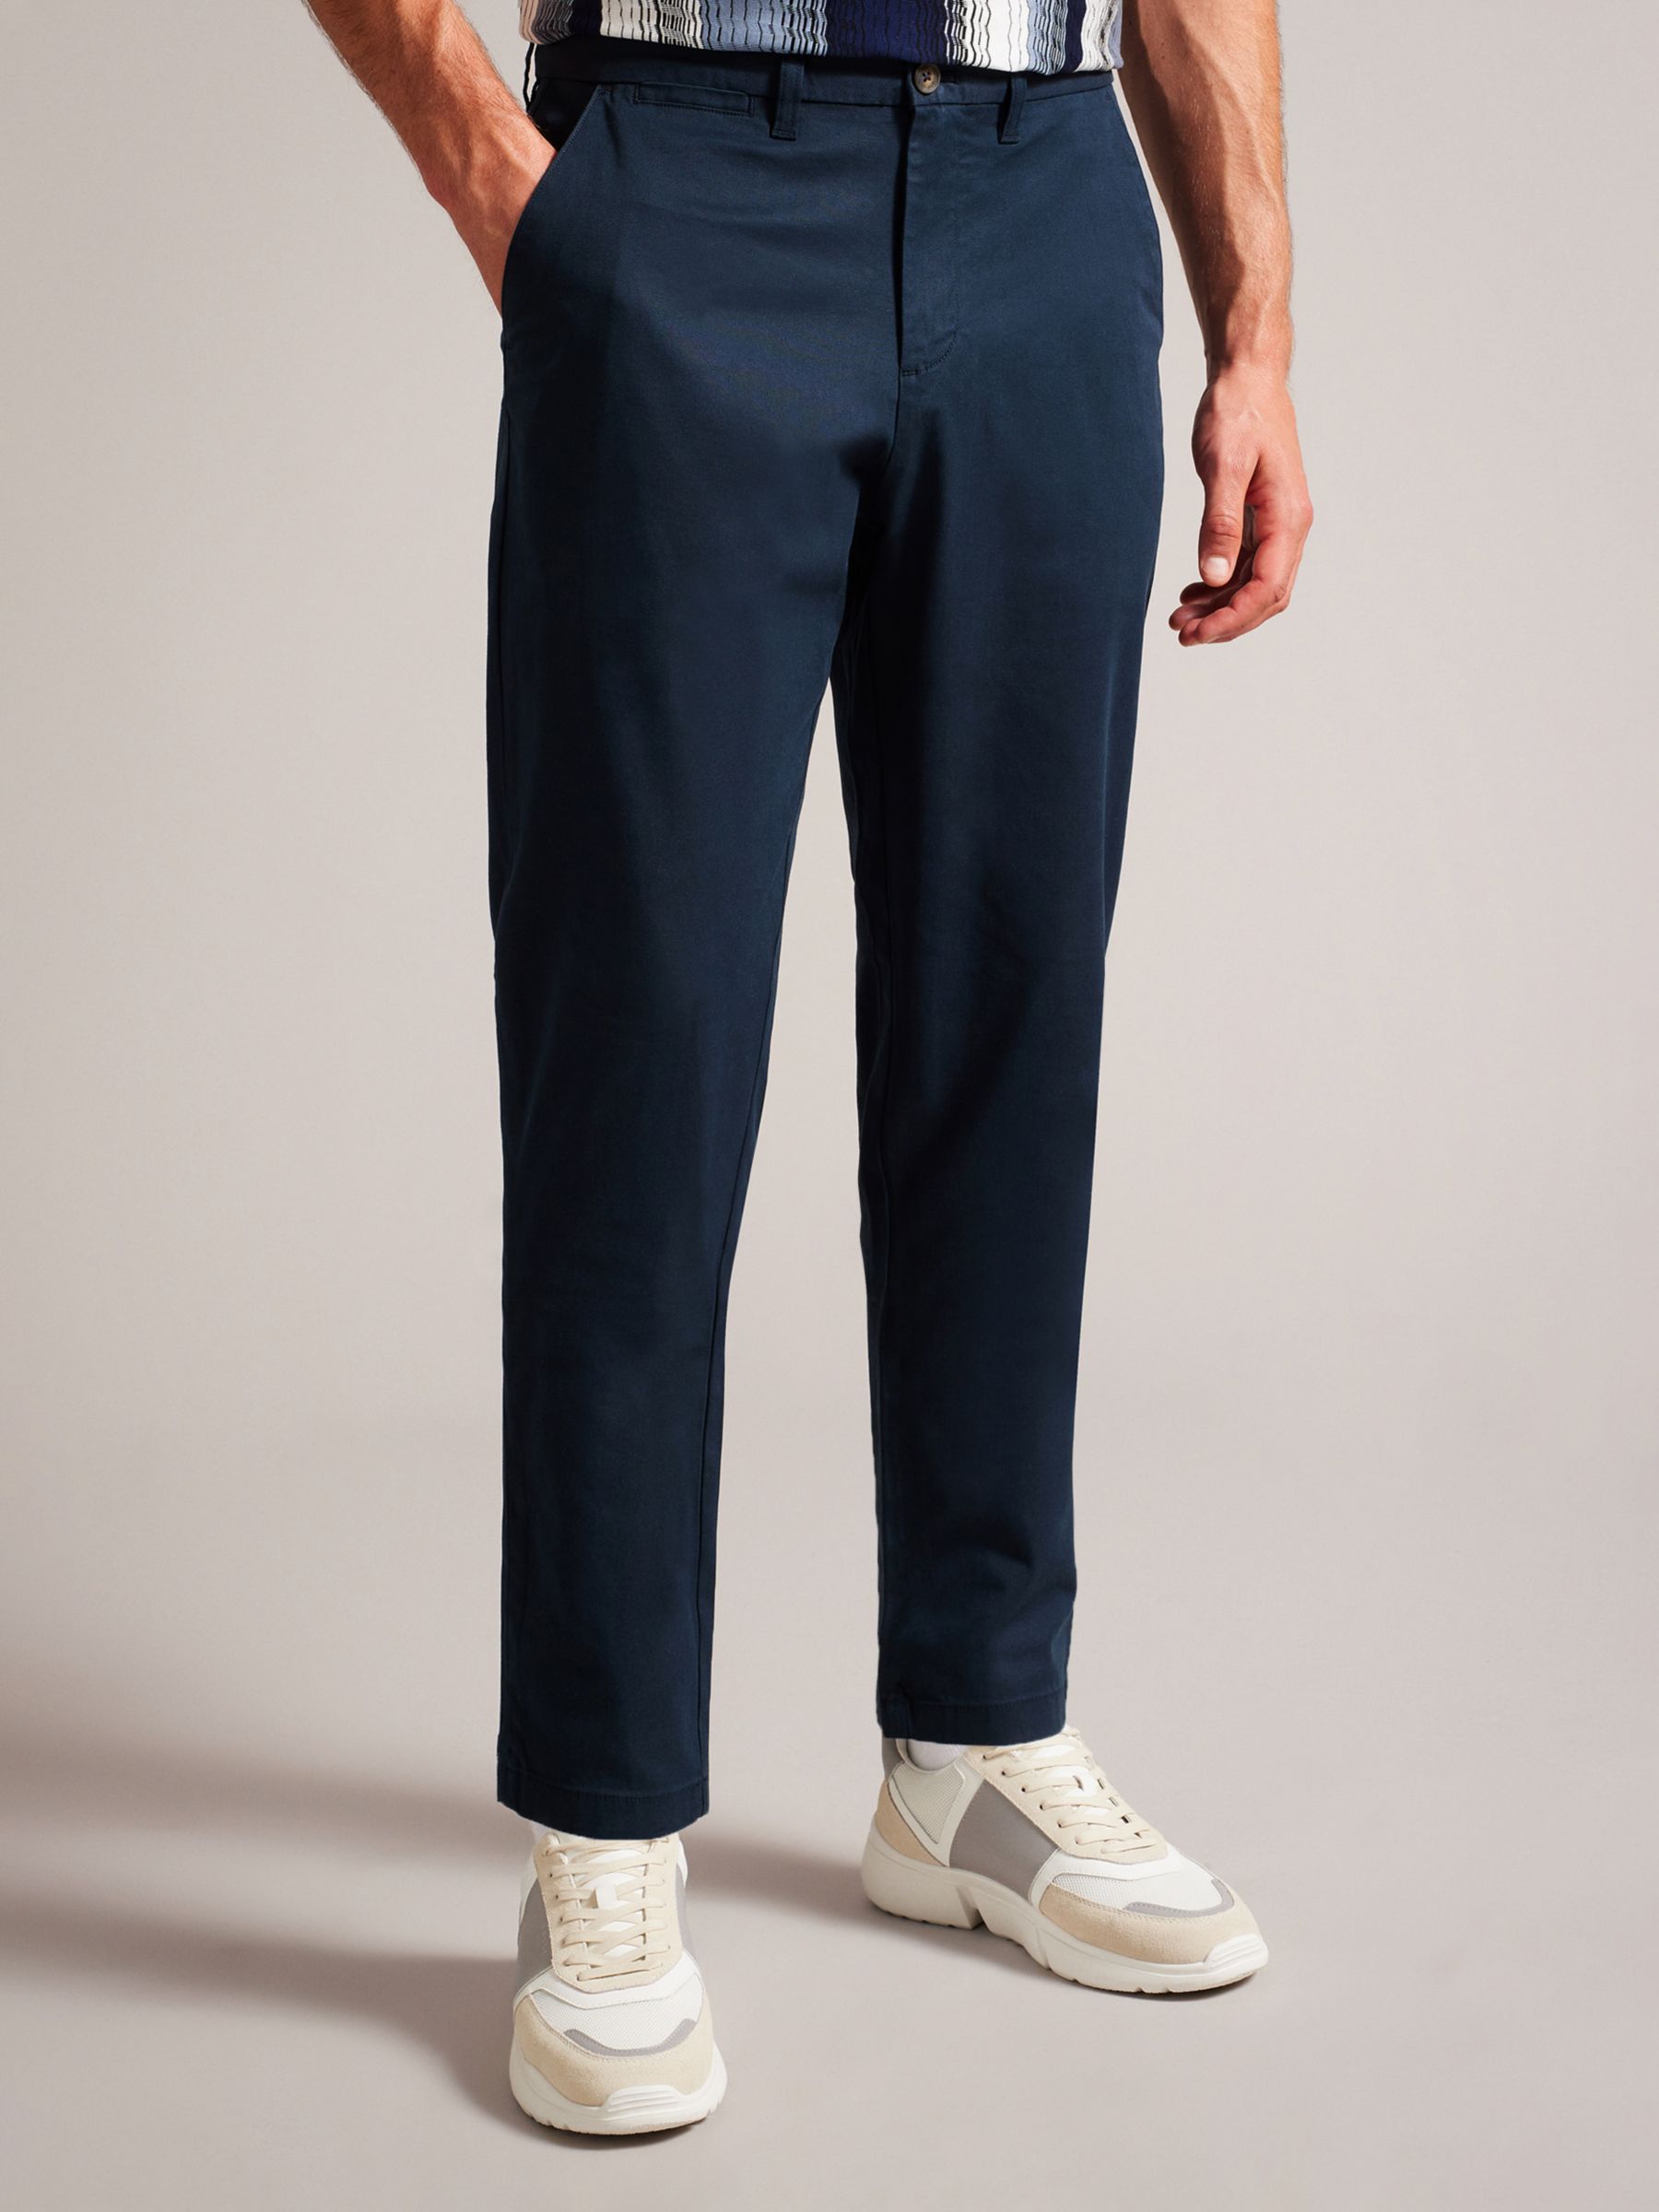 Ted Baker Haybrn Blue Navy Chino Trouser, Navy at John Lewis & Partners